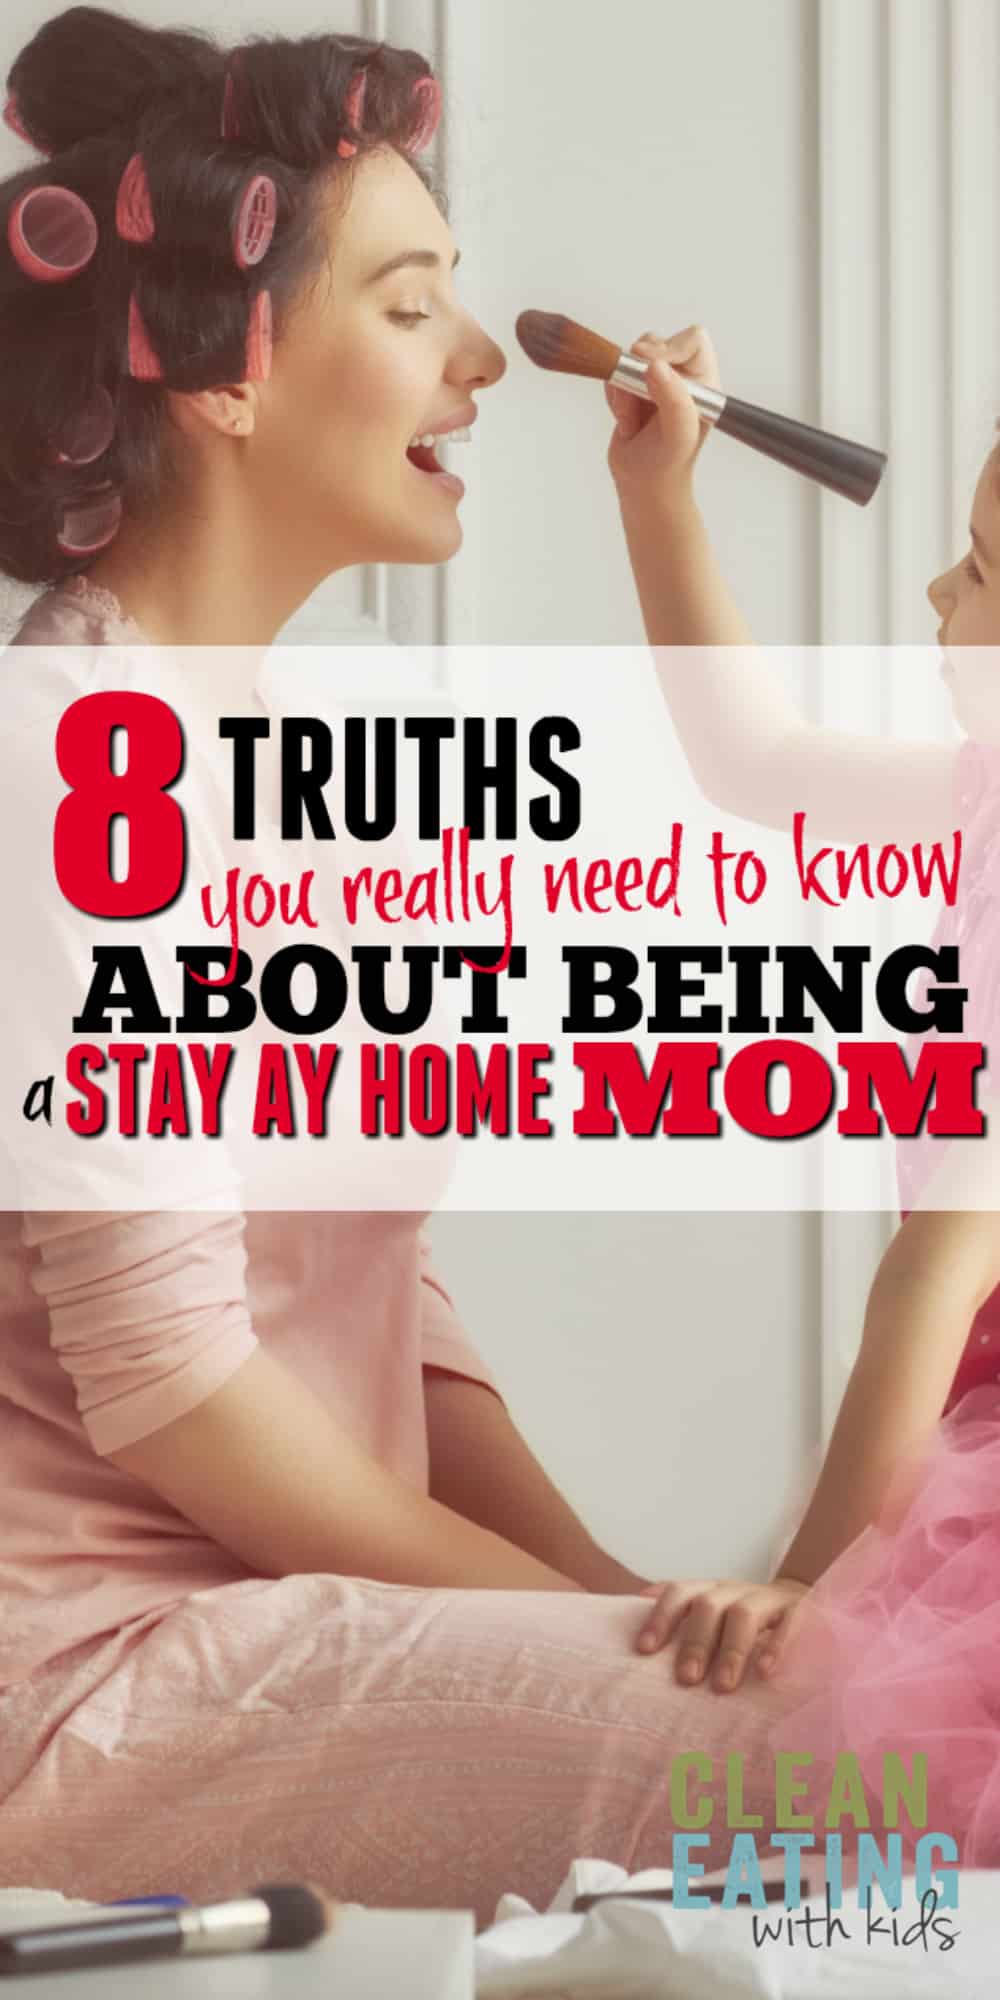  the Truth about being a Stay at Home Mom: 8 things you need to know.